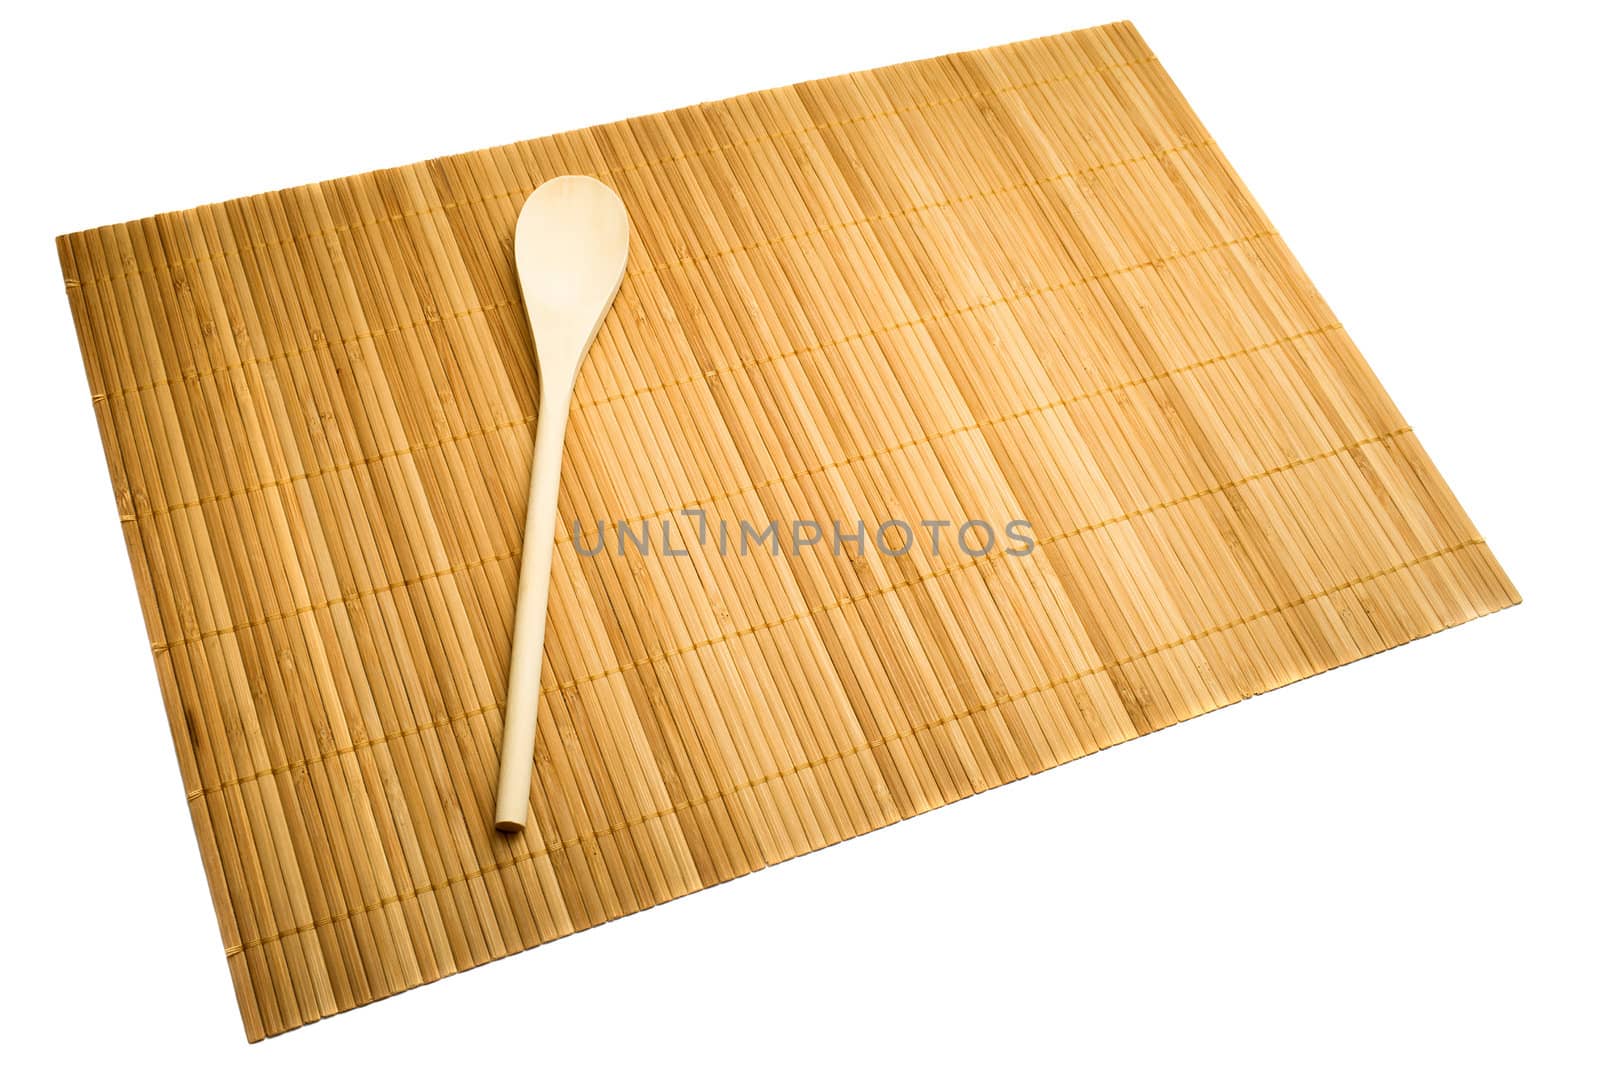 Wooden spoon on mat of bamboo by Nickondr